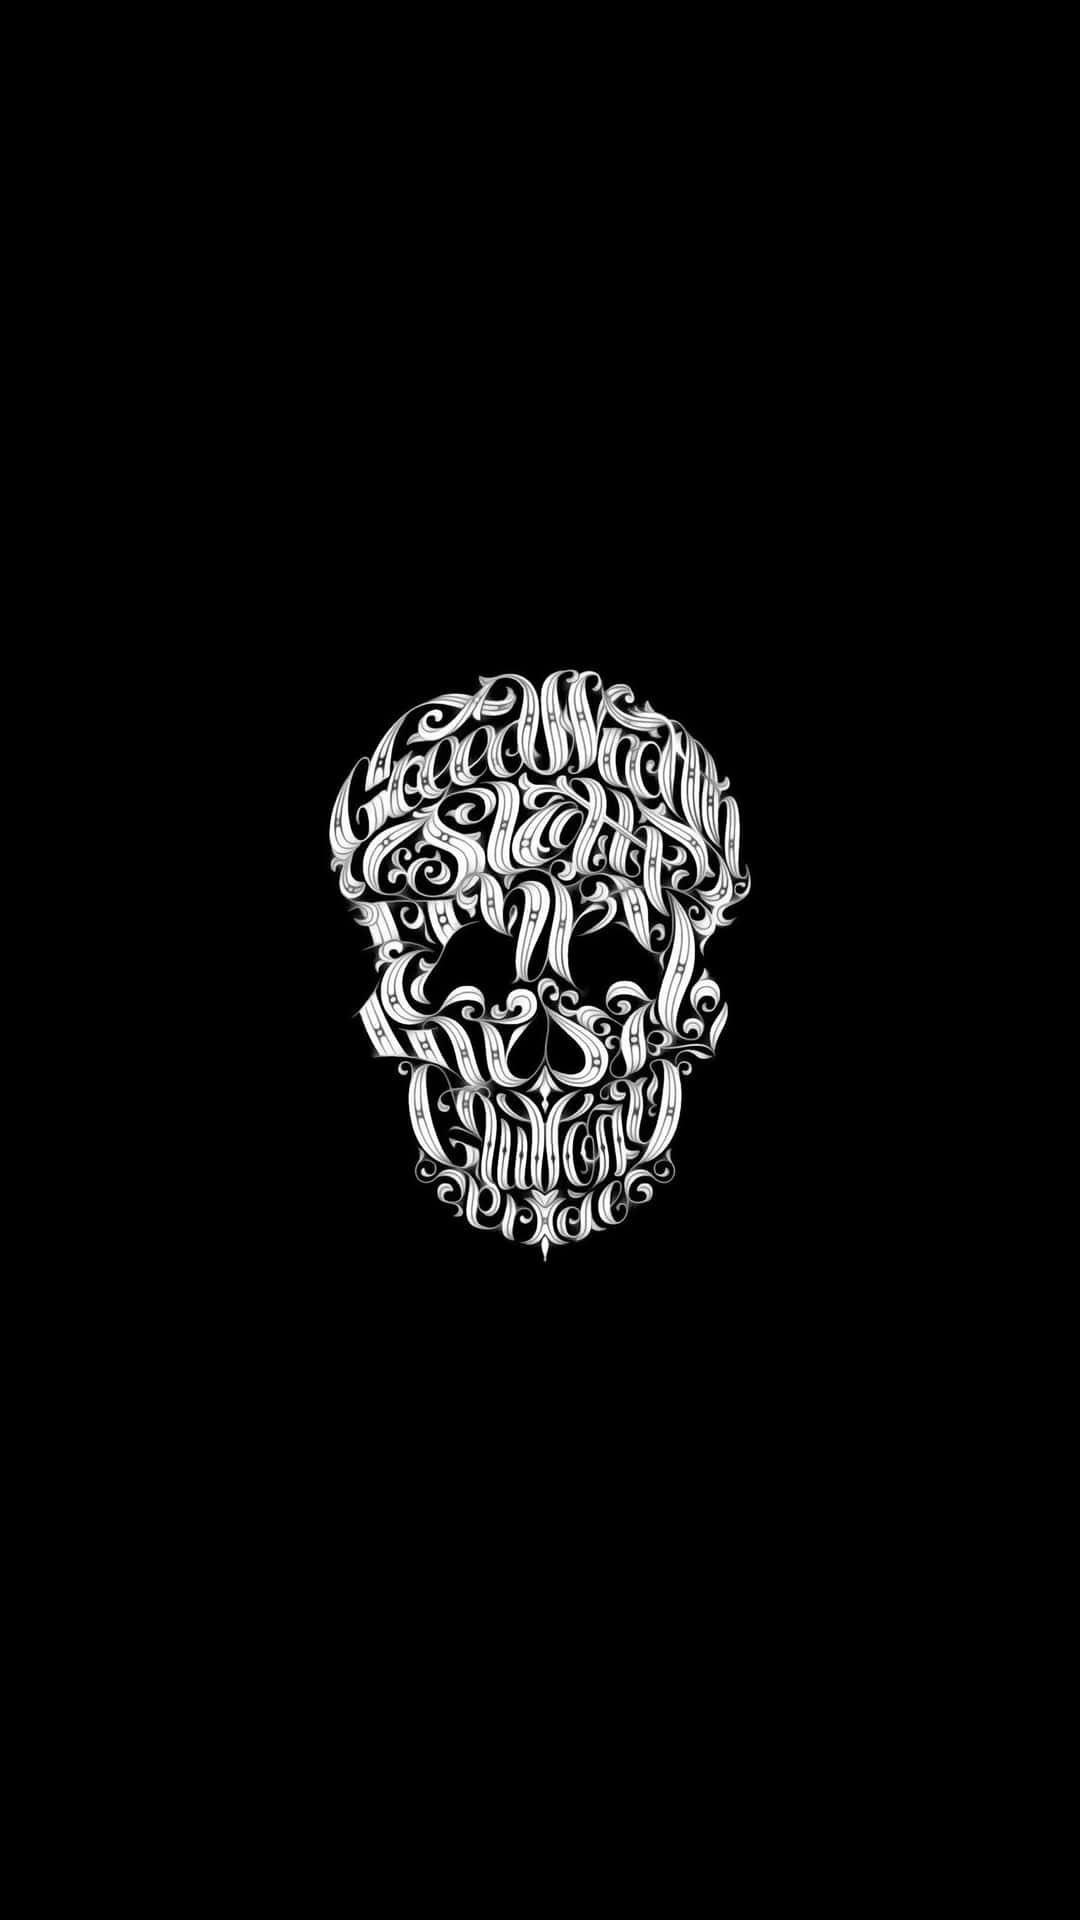 A Skull With A Black Background Wallpaper